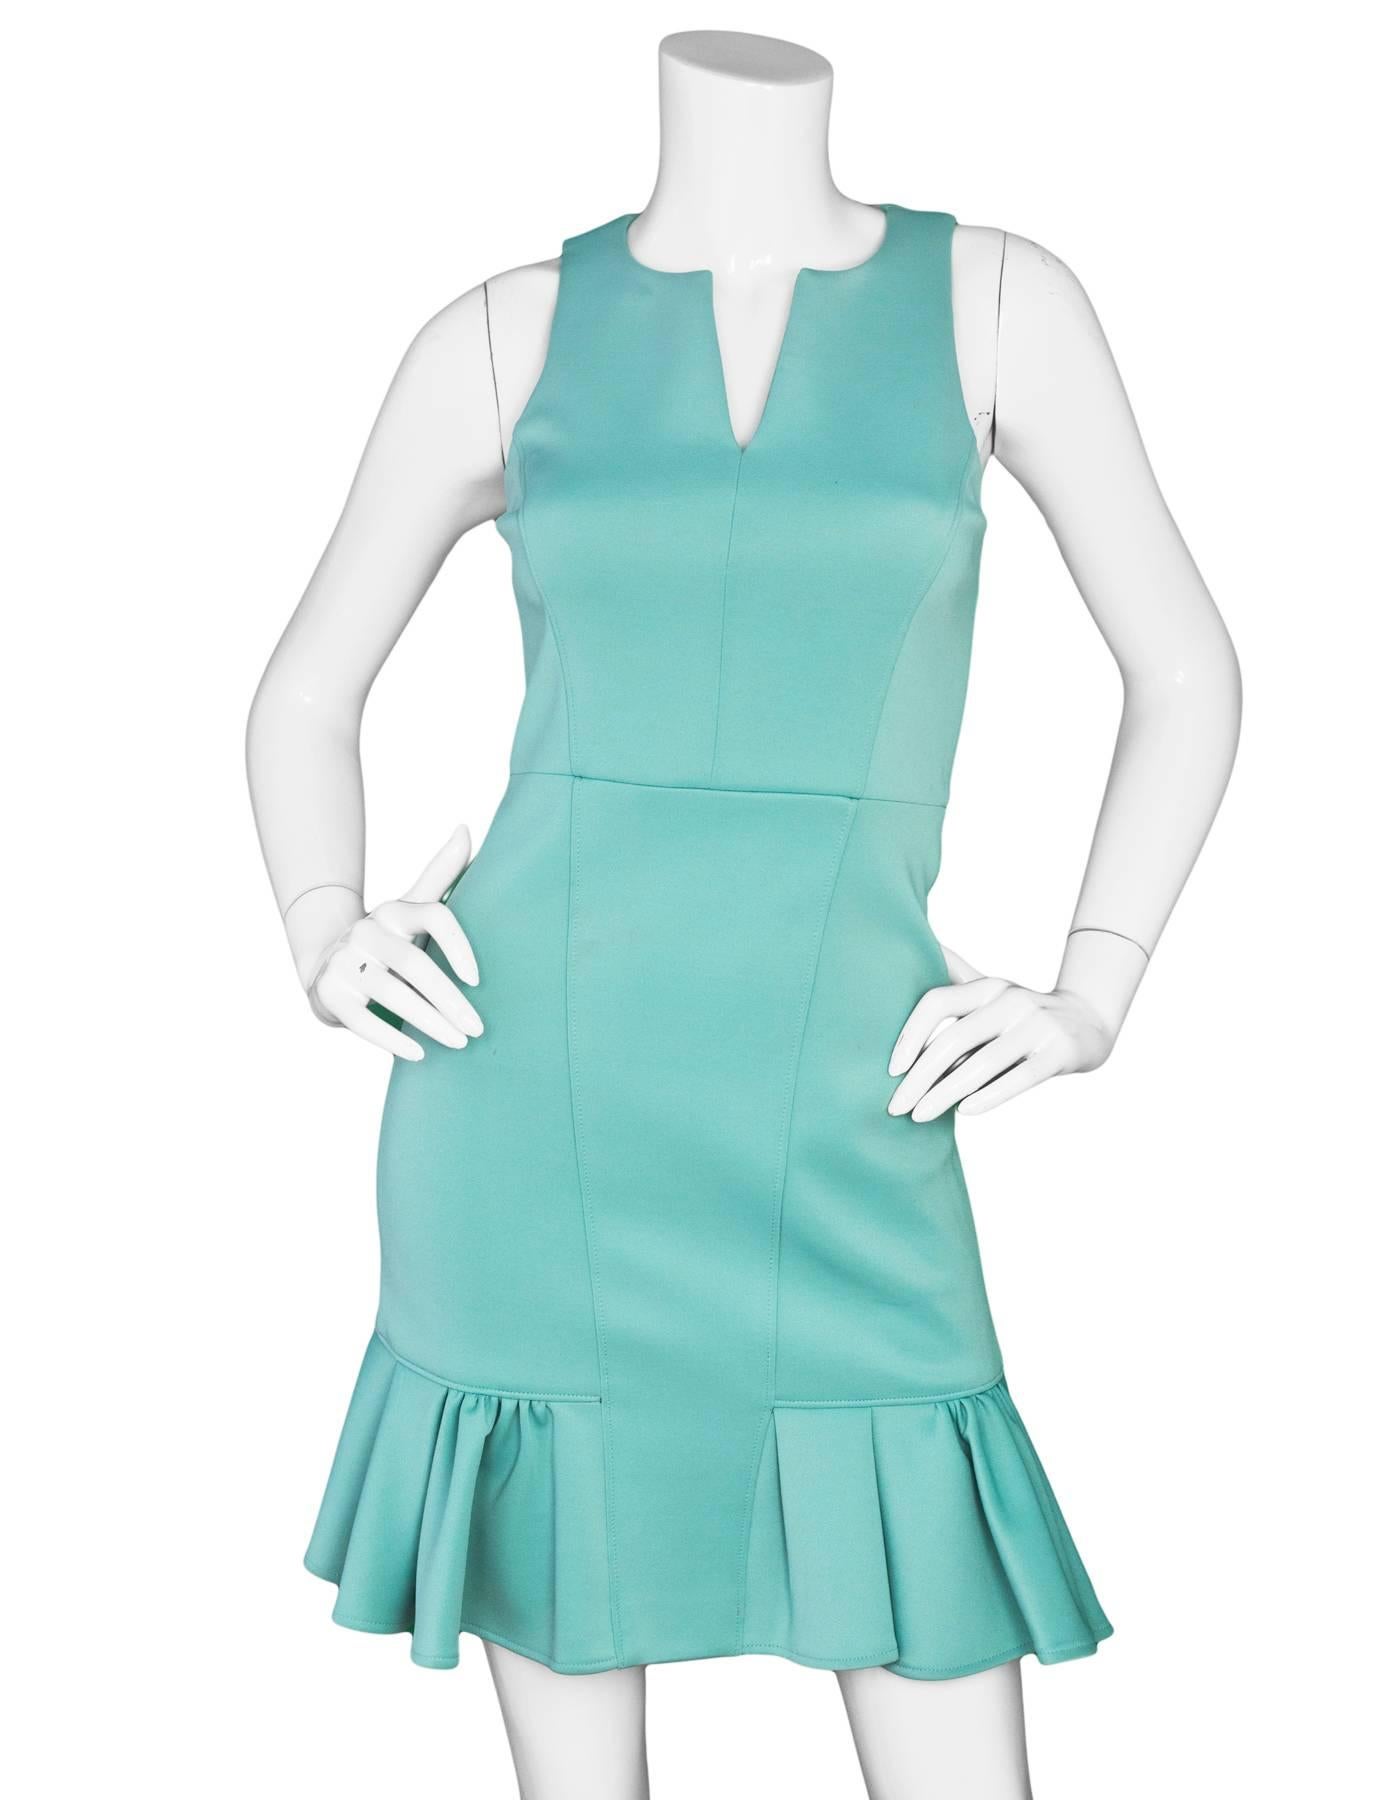 Tibi Sea Foam Green Sleeveless Dress Sz 0

Features flirty ruffle hem

Made In: China
Color: Red
Composition: 88% polyester, 12% elastane
Lining: Black polyester
Closure/Opening: Zip closure at back
Exterior Pockets: None
Interior Pockets: